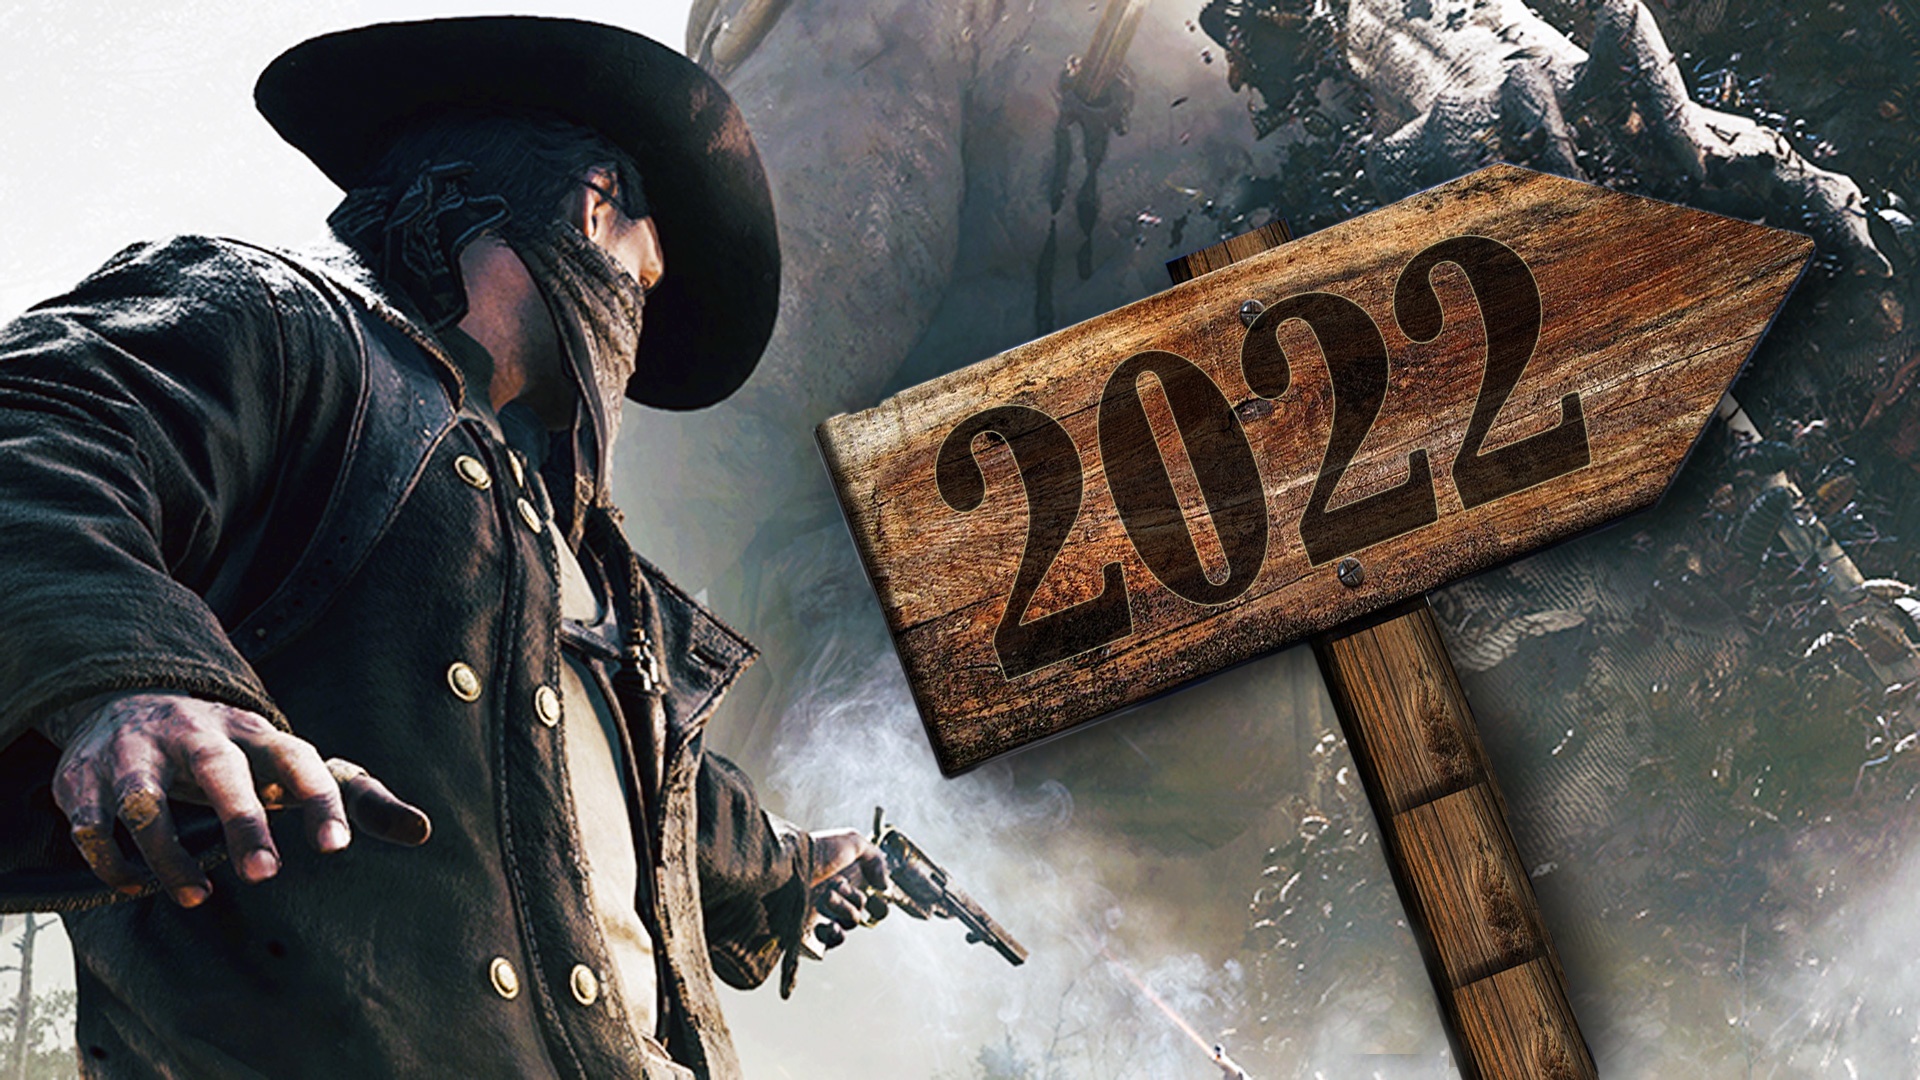 Hunt Showdown roadmap revealed 2022 is going to be big iGamesNews